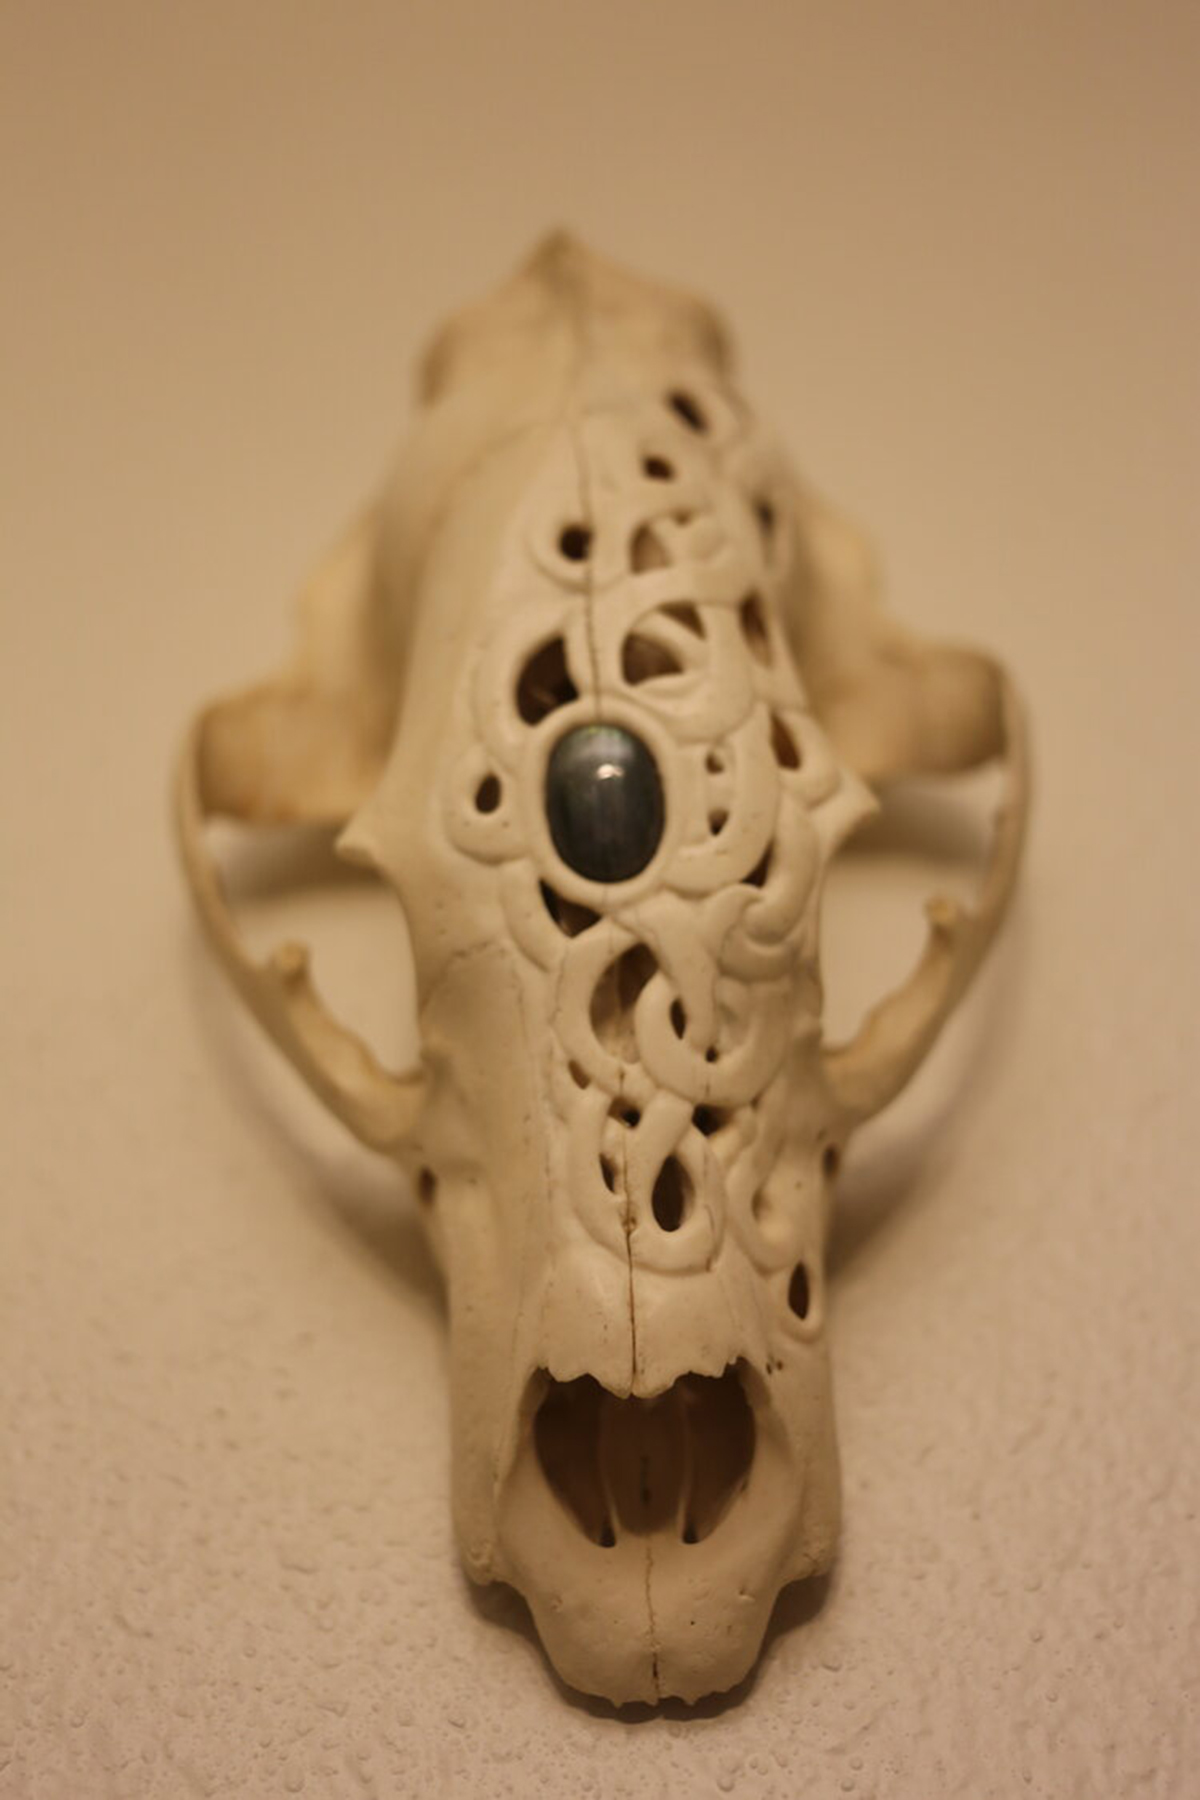 Carved skull with small inlaid stone. Image courtesy of Indi Walter